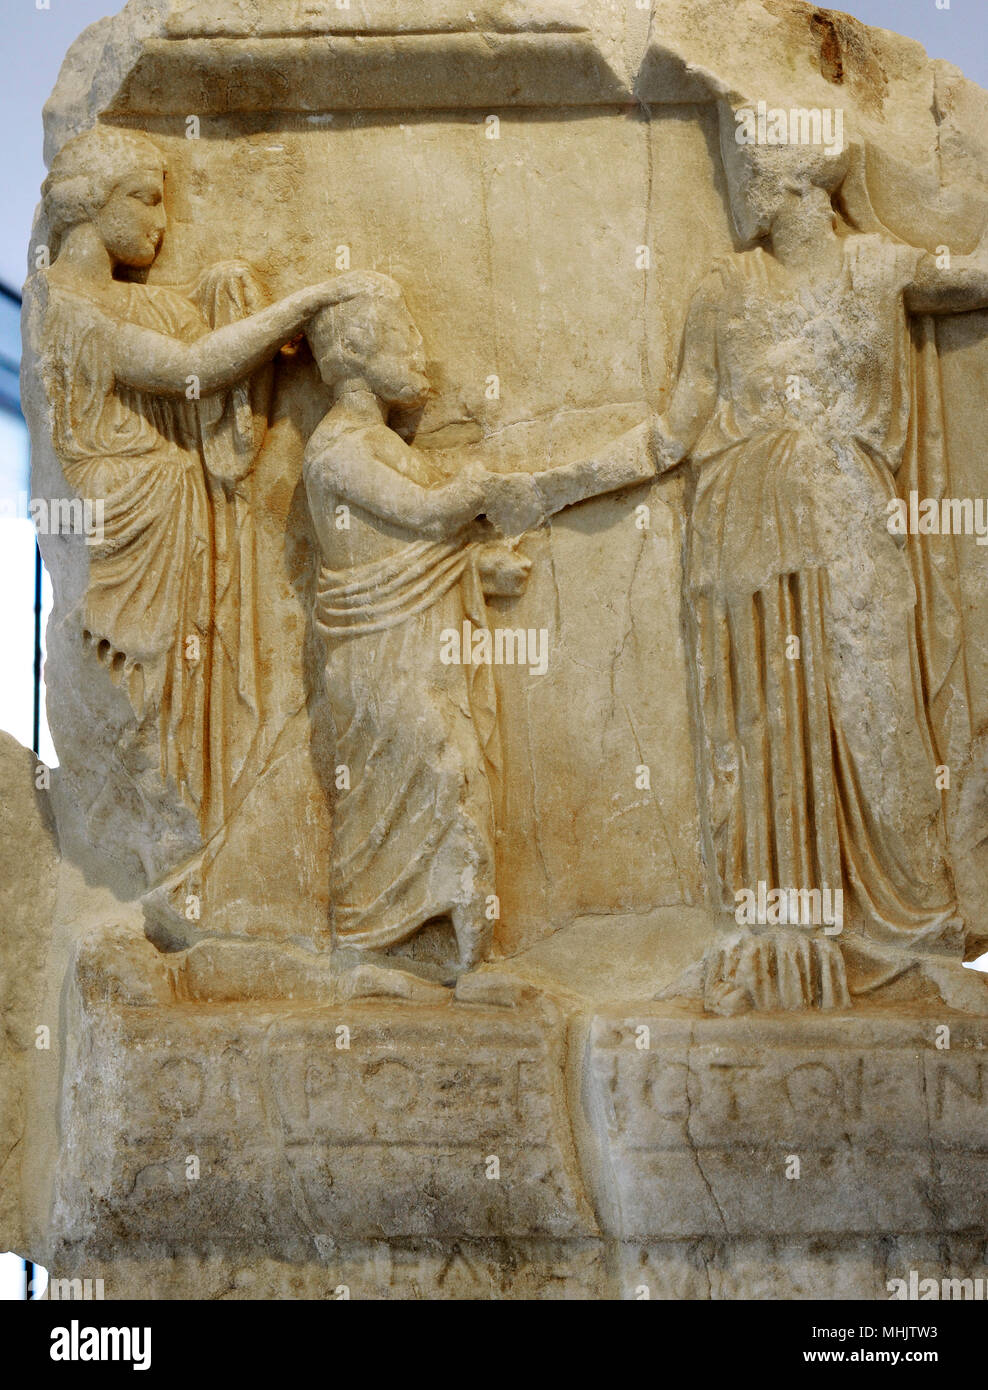 Honorary decree for Proxenides of Knidos. The Athenians bestow on Proxenidos, son of Proxenos, the title of proxemos (consul) and benefactor. Relief depicting the honoree stands between Athena, who offers him a wreath, and Aphrodite, who introduces him to Athena. Detail. Ca. 420 BC. Acropolis Museum. Athens. Greece. Stock Photo